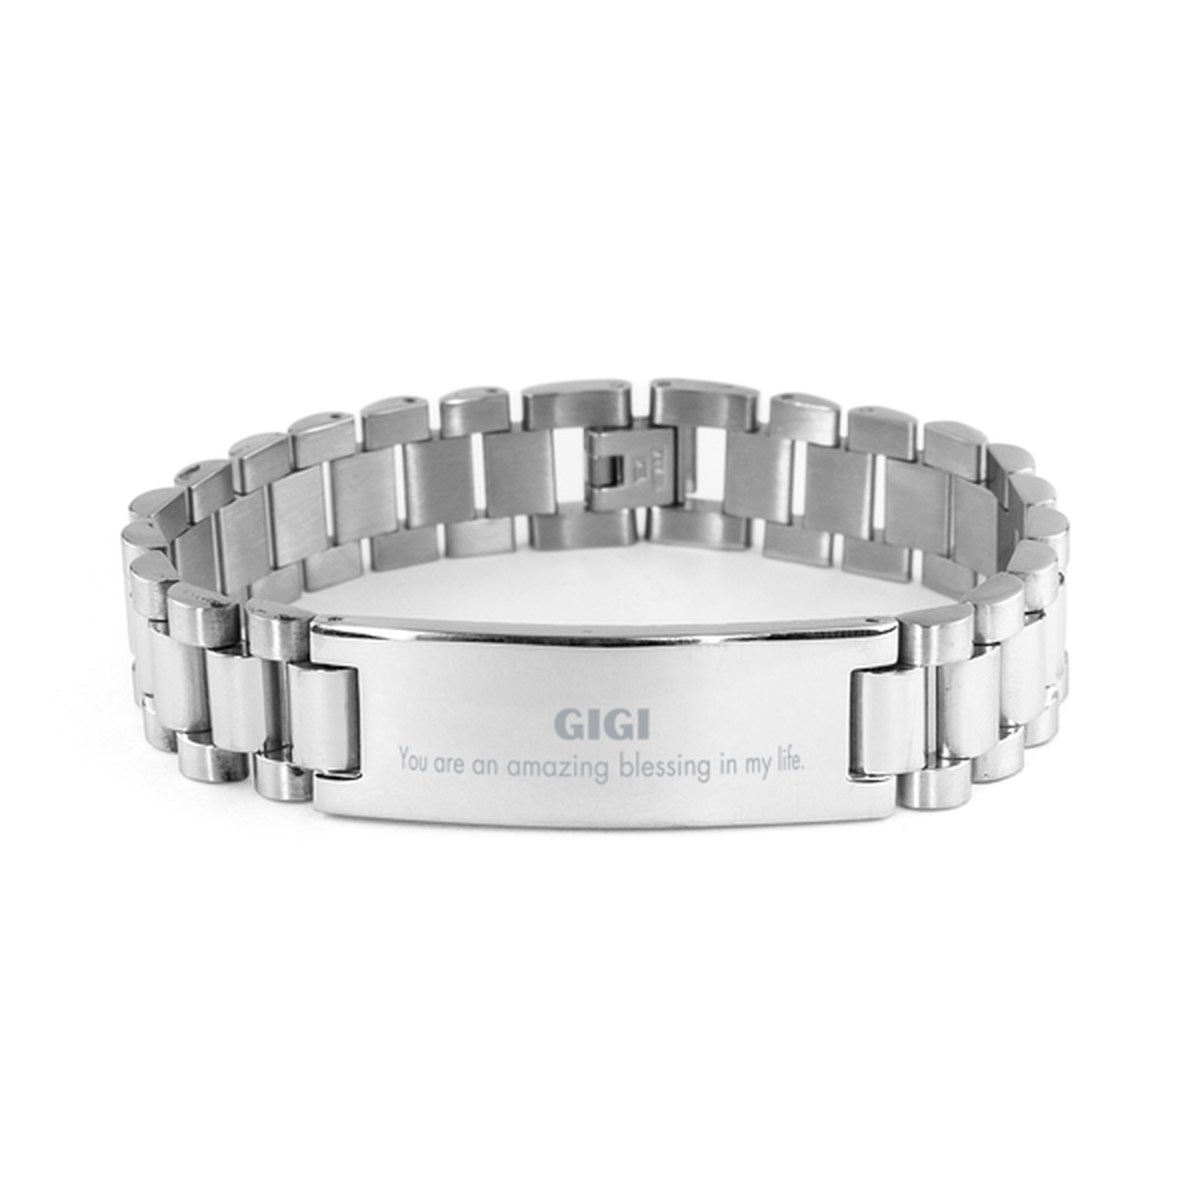 Gigi Ladder Stainless Steel Bracelet, You are an amazing blessing in my life, Thank You Gifts For Gigi, Inspirational Birthday Christmas Unique Gifts For Gigi